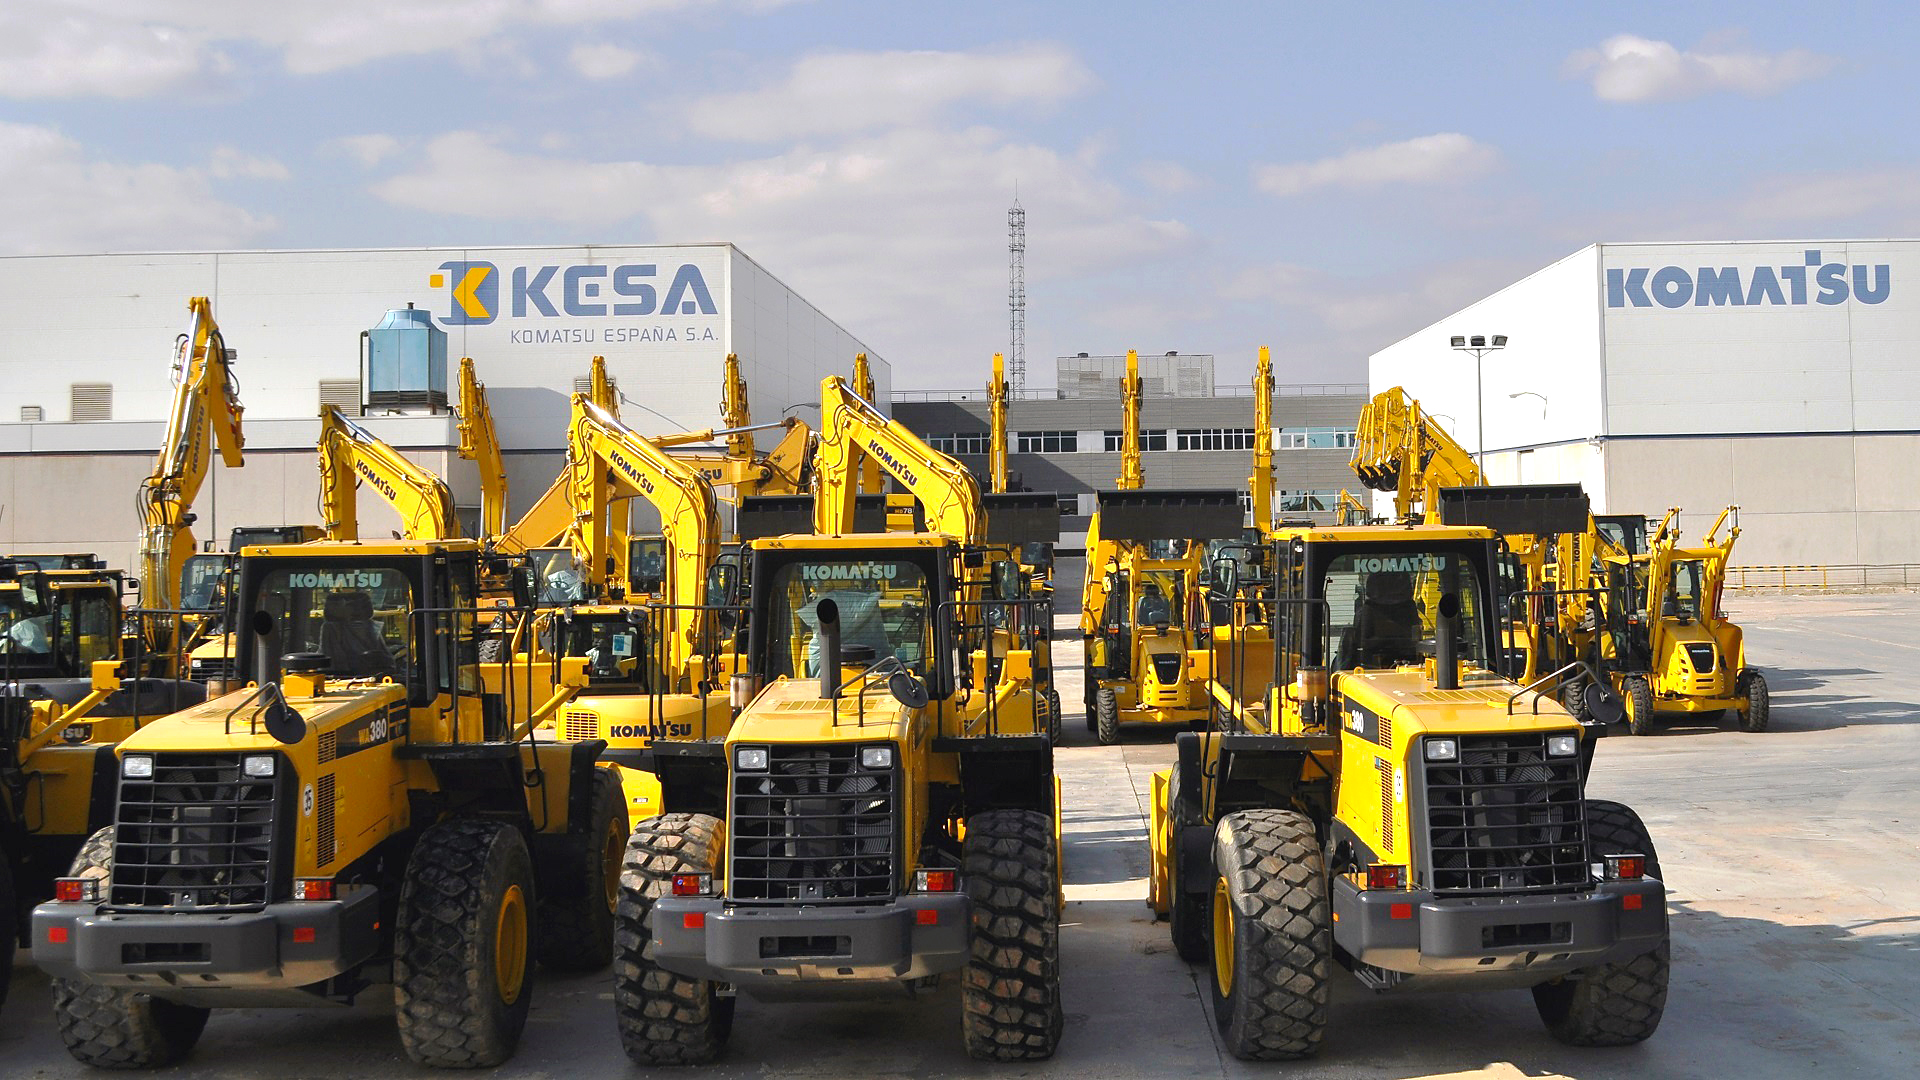 Developing construction equipment dealership business globally and